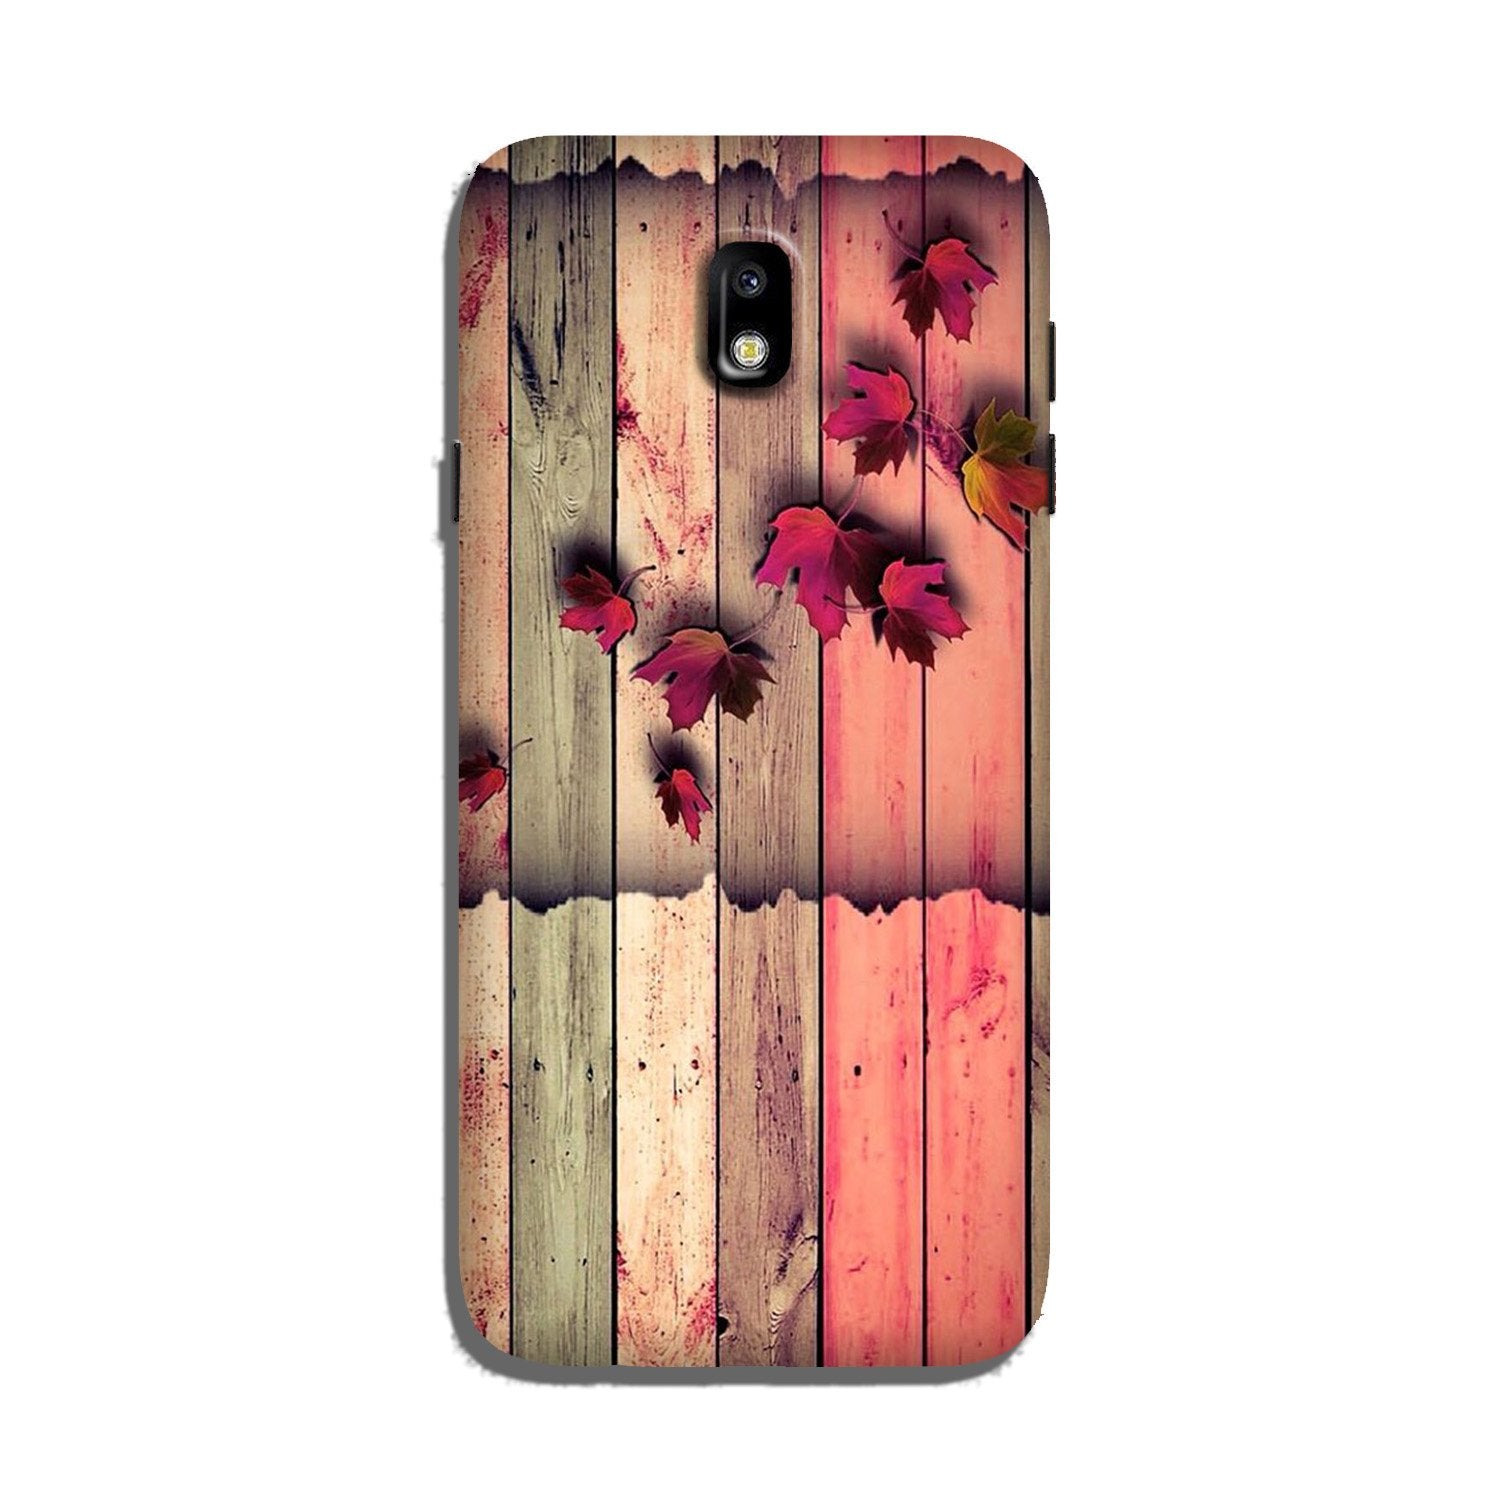 Wooden look2 Case for Galaxy J7 Pro